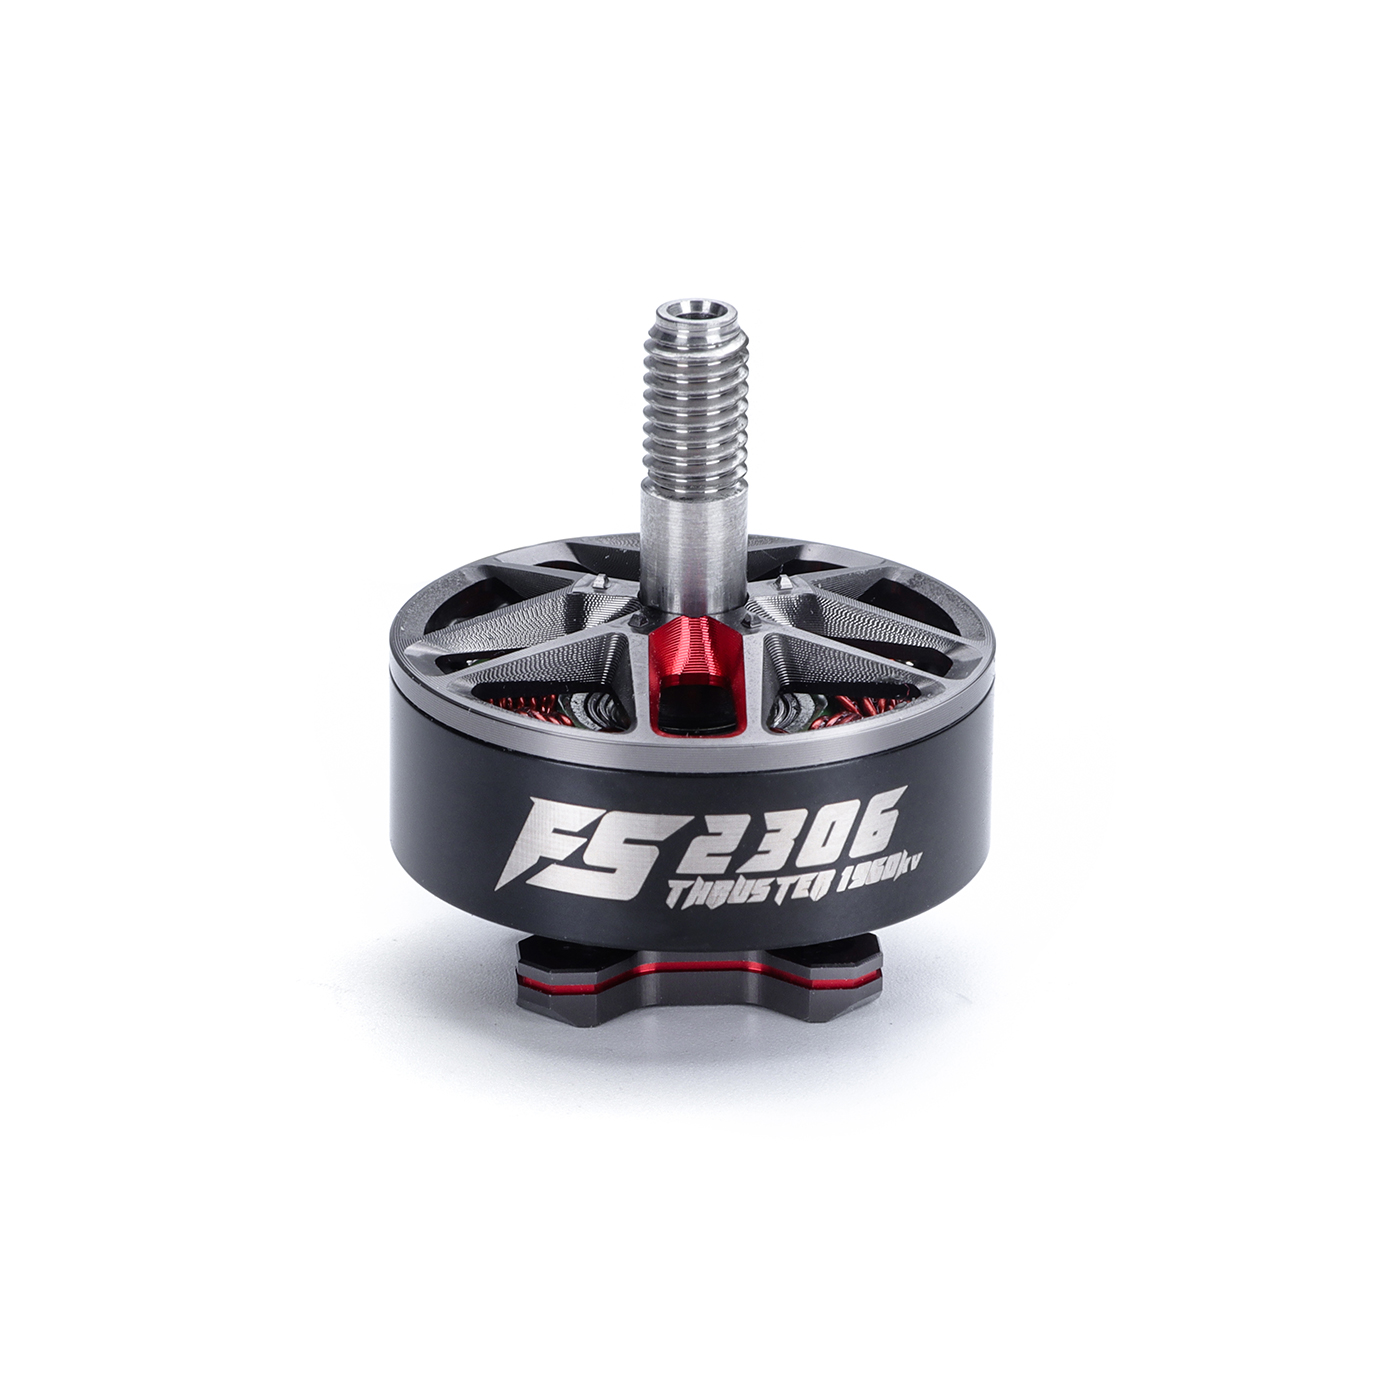 MAD Thruster FS2306  Brushless motor for 5-6inch freestyle FPV drone